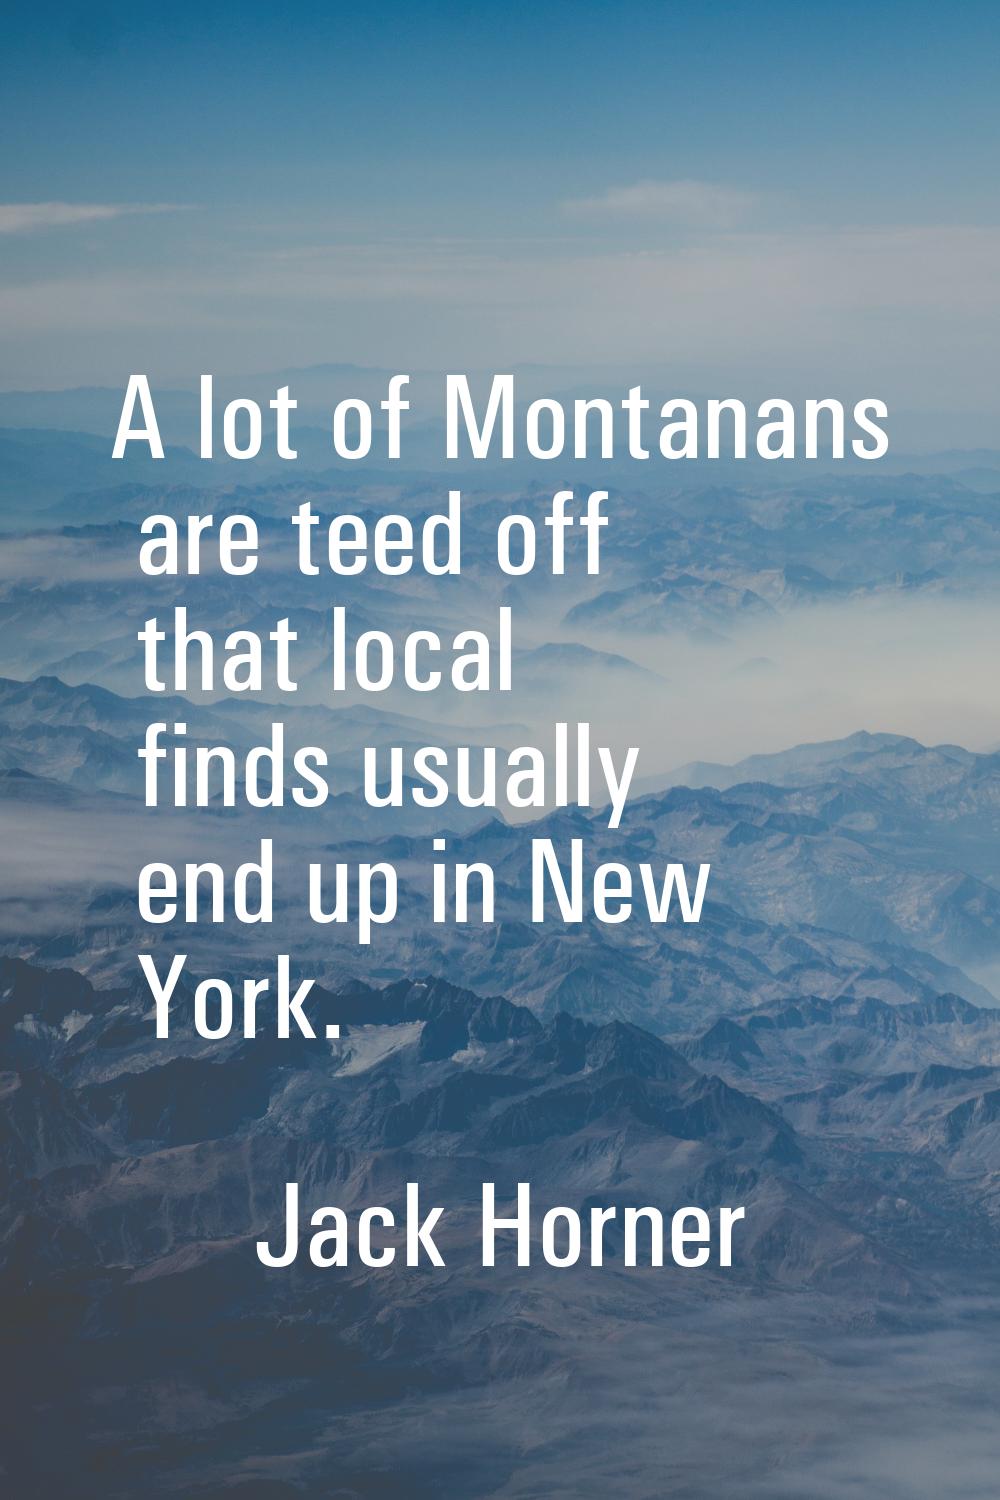 A lot of Montanans are teed off that local finds usually end up in New York.